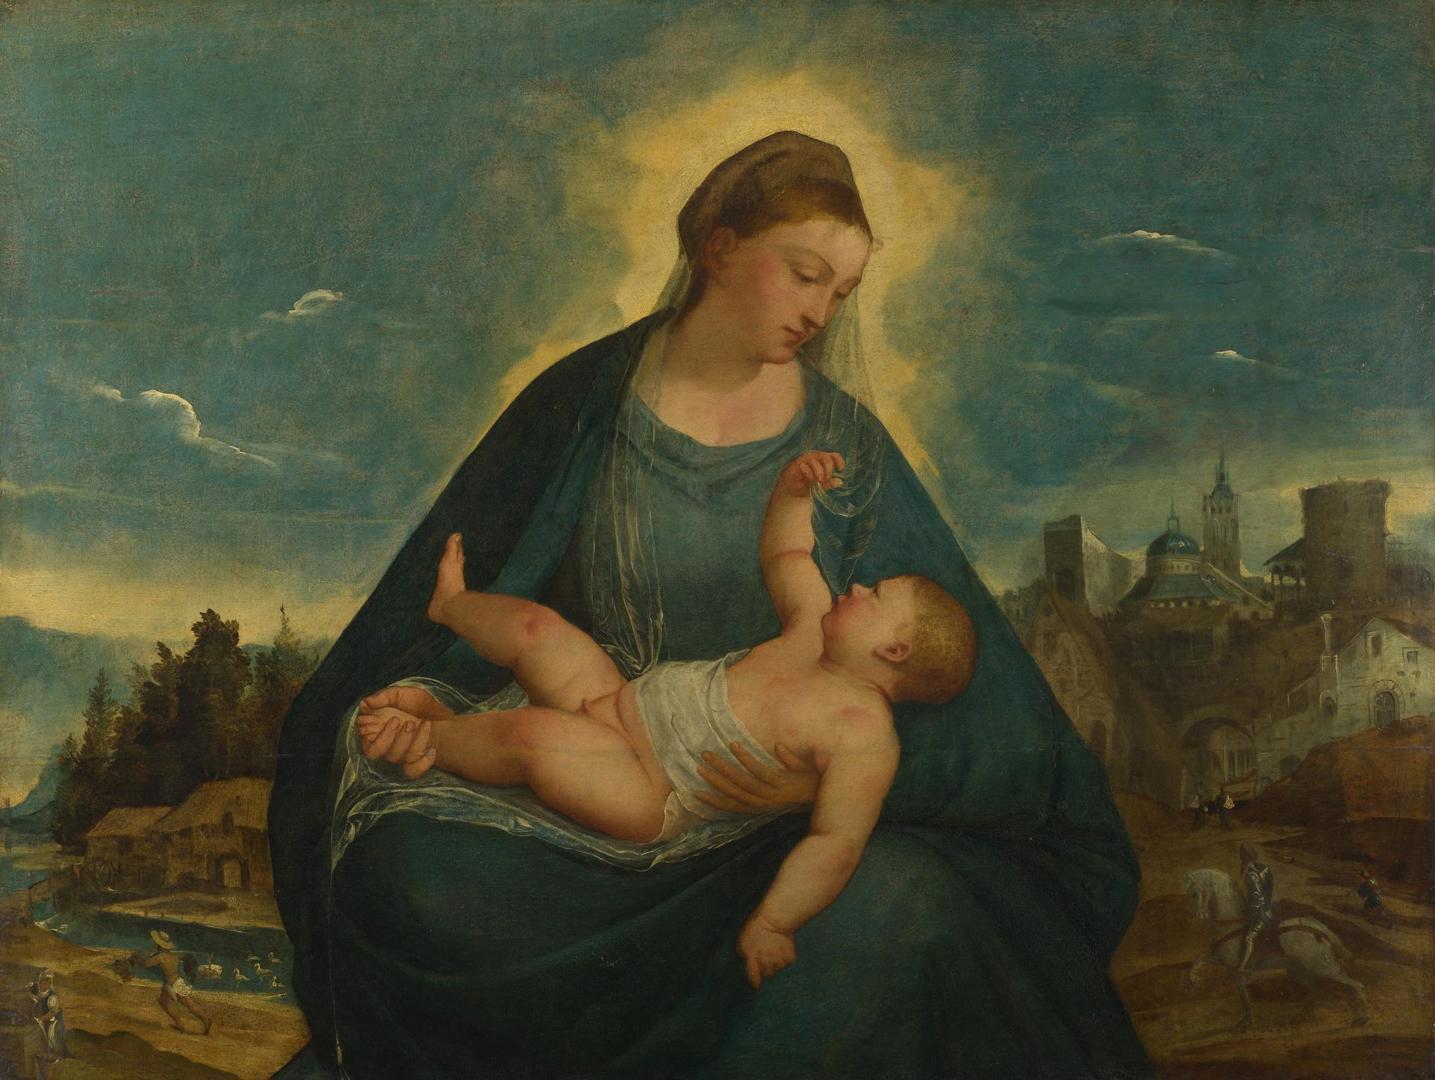 The Madonna and Child by Italian, North